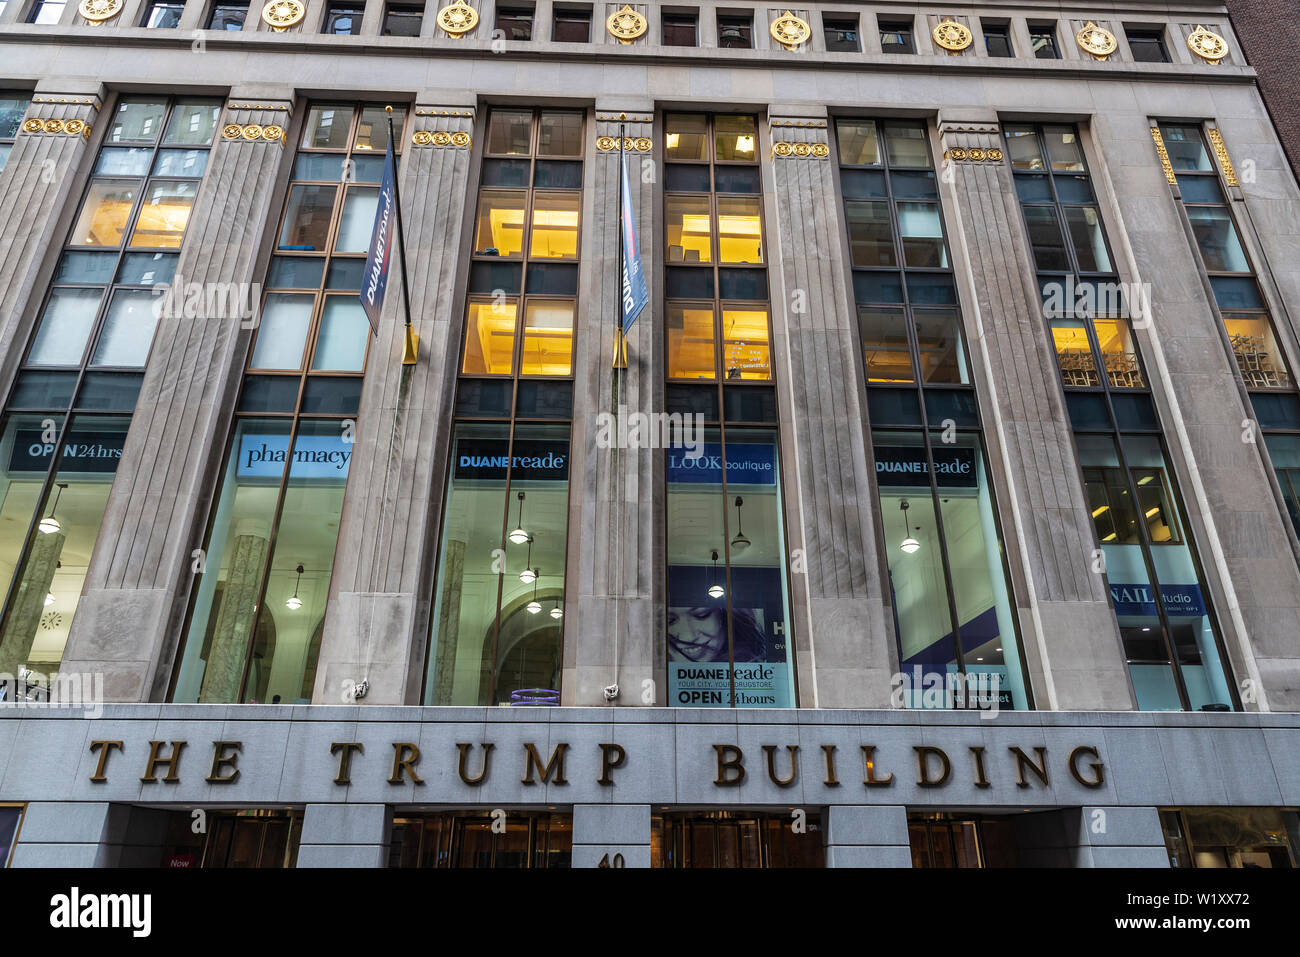 New York City, USA - August 1, 2018: Facade of The Trump Building on 40 Wall Street in Manhattan, New York City, USA Stock Photo